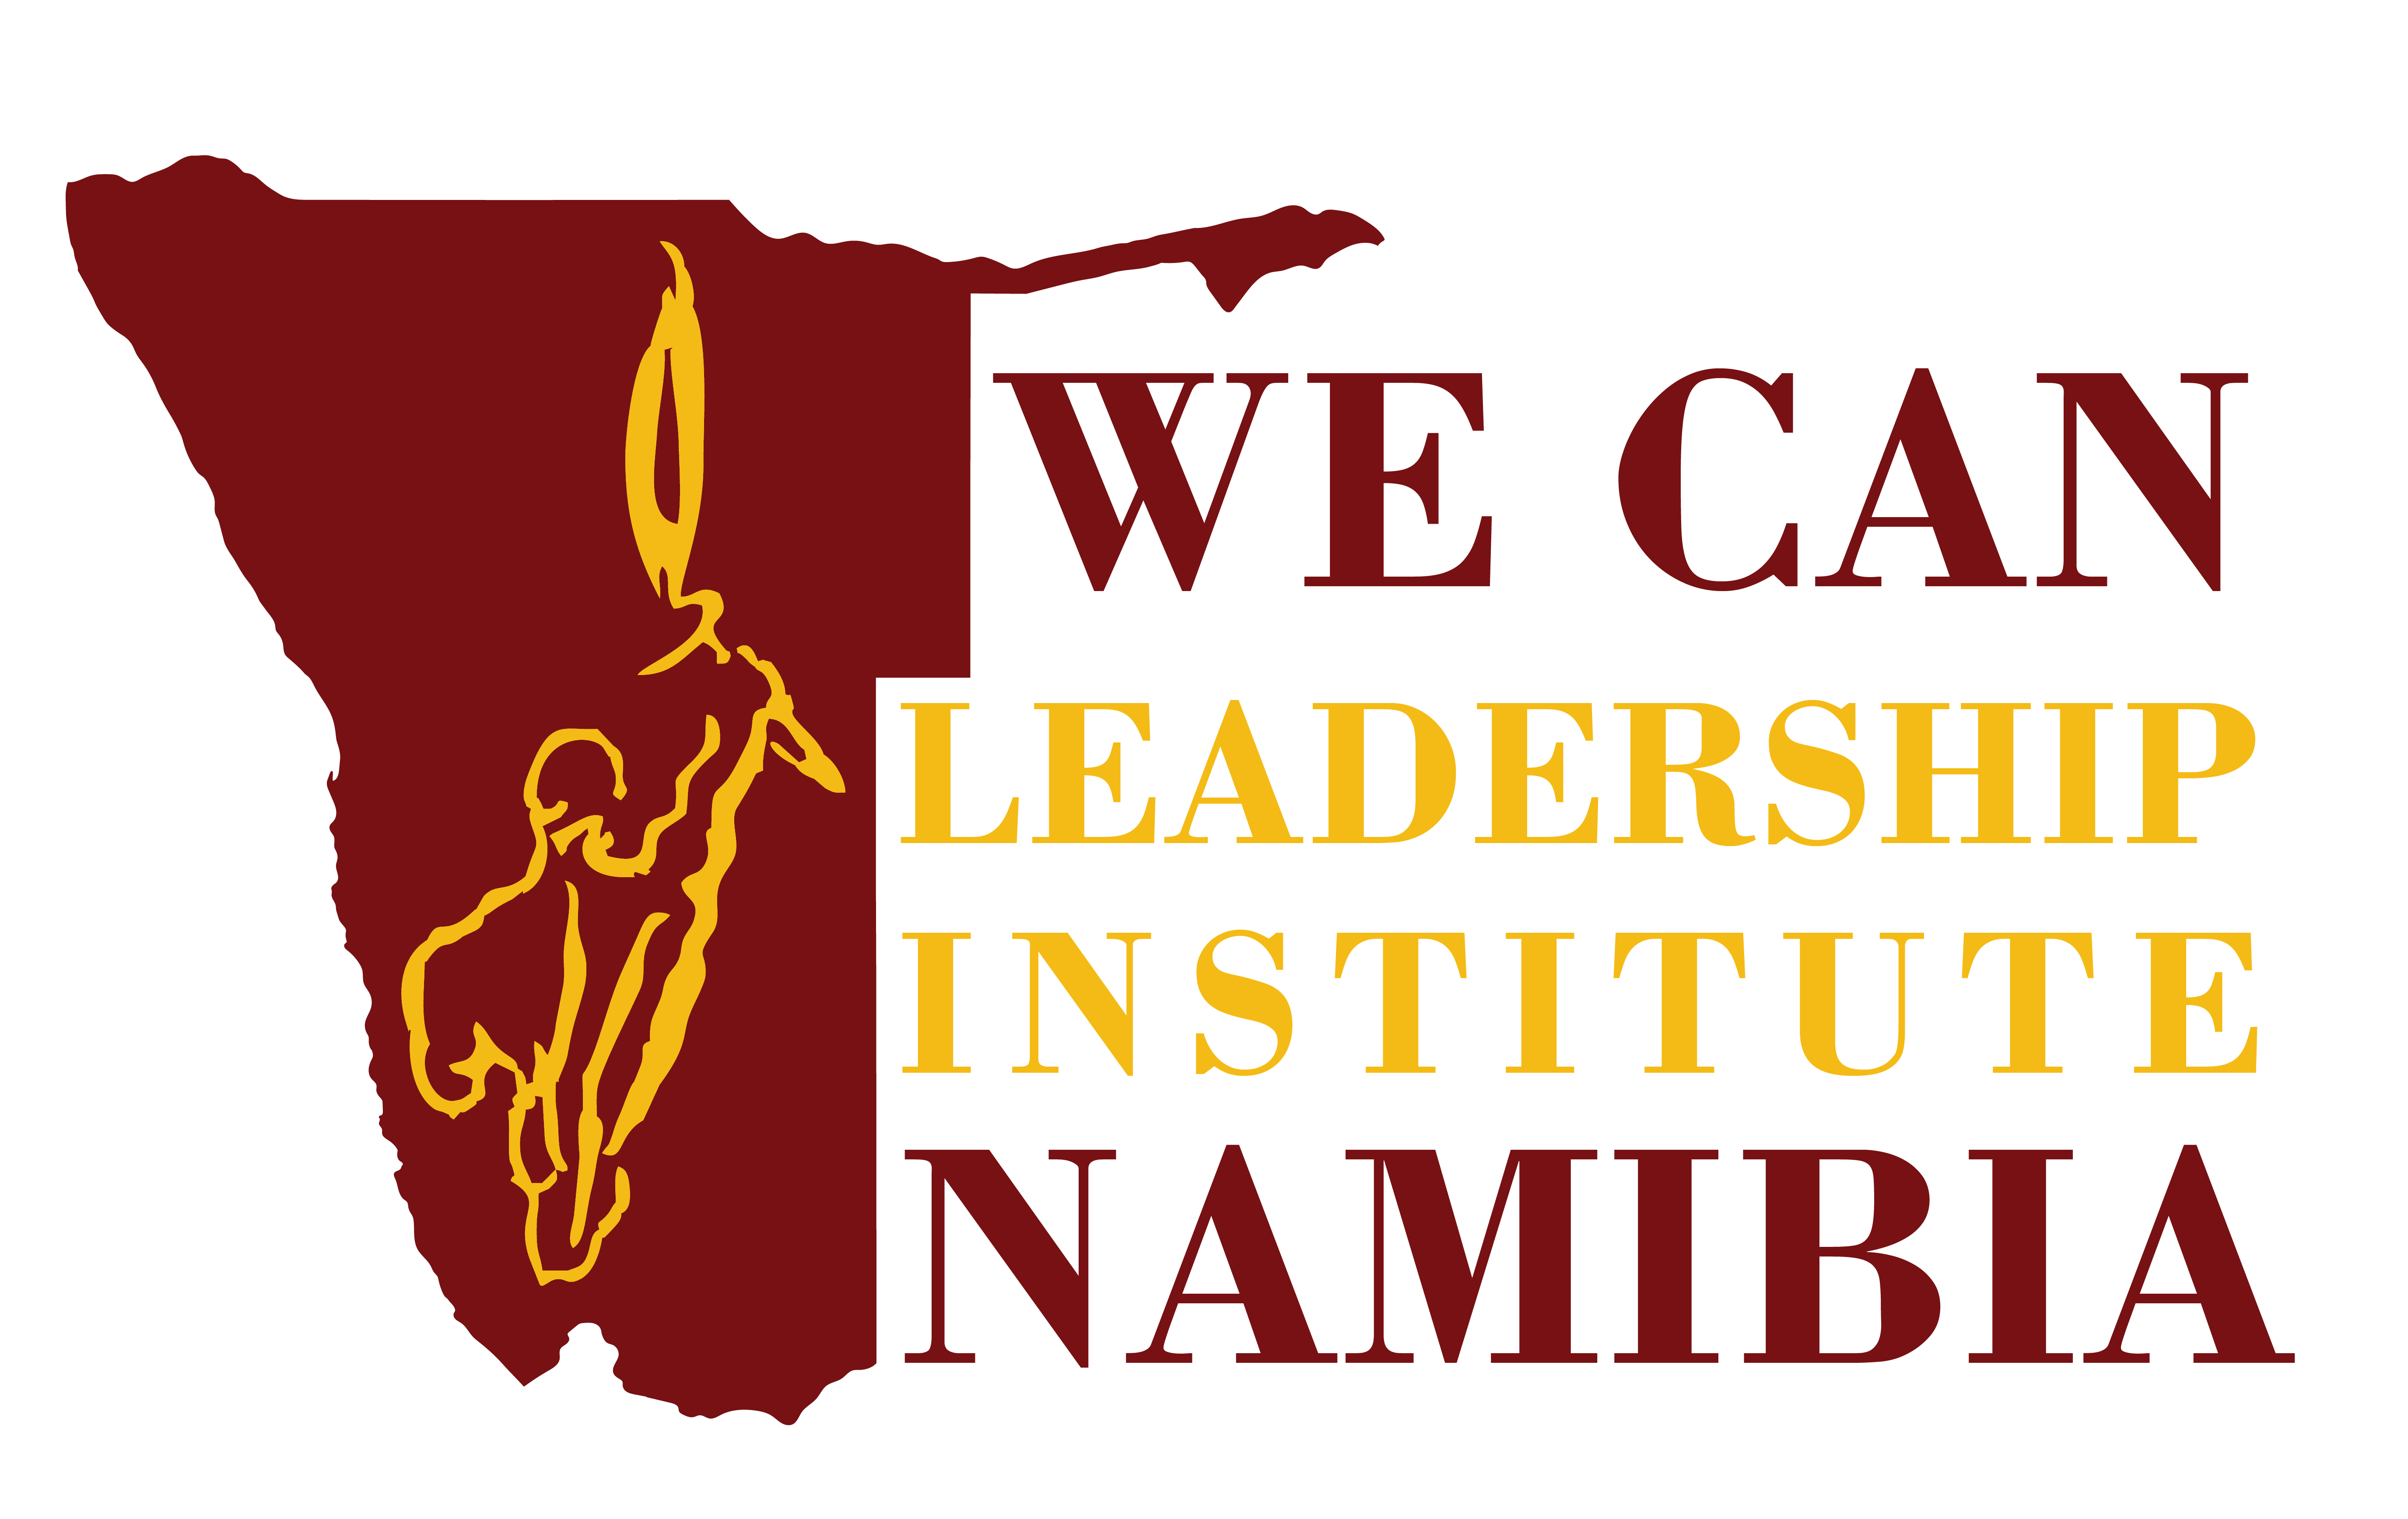 We-Can Leadership Institute Namibia